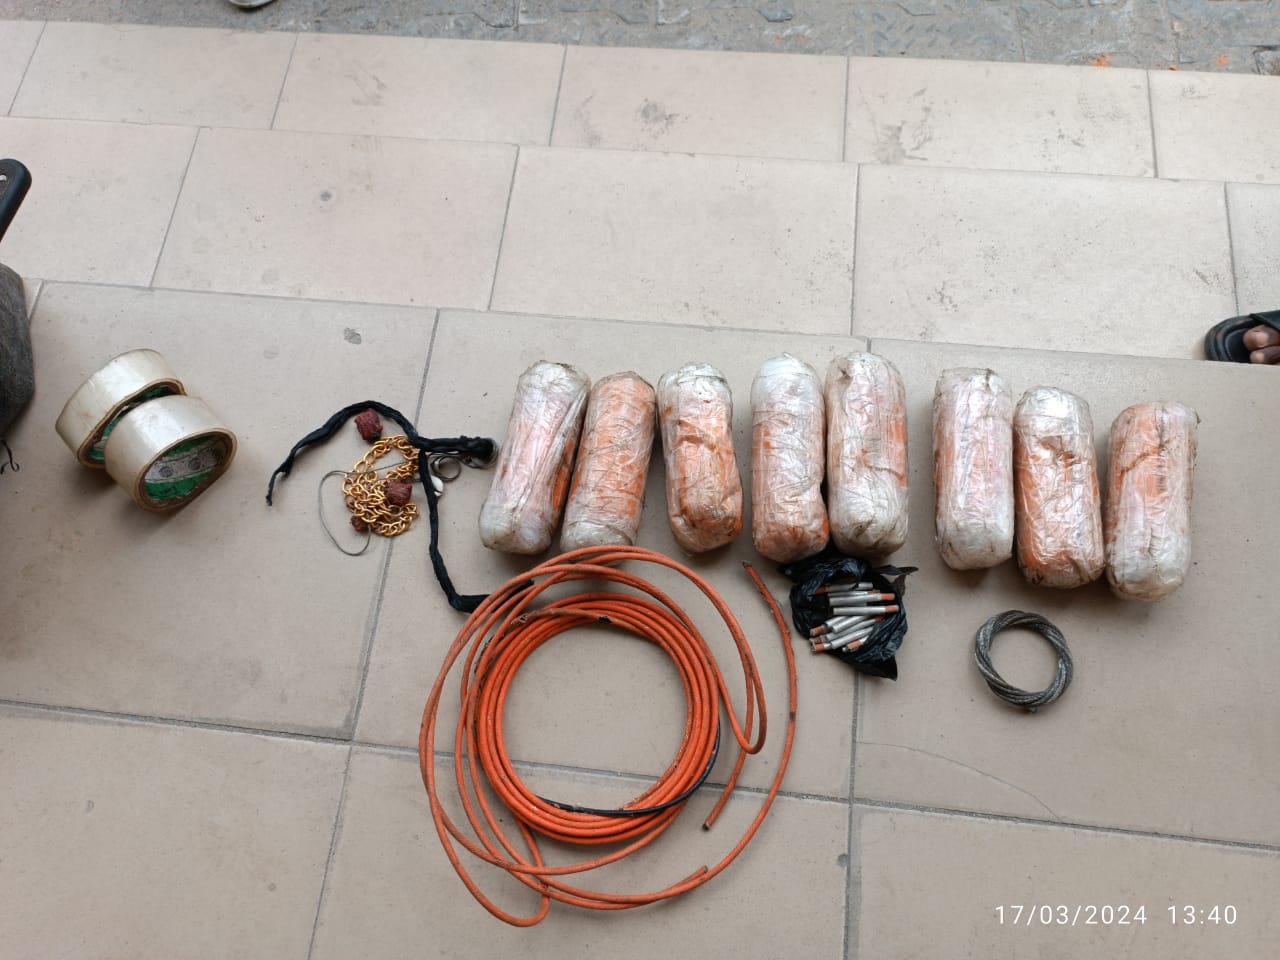 Explosive devices recovered from cult camp in Rivers